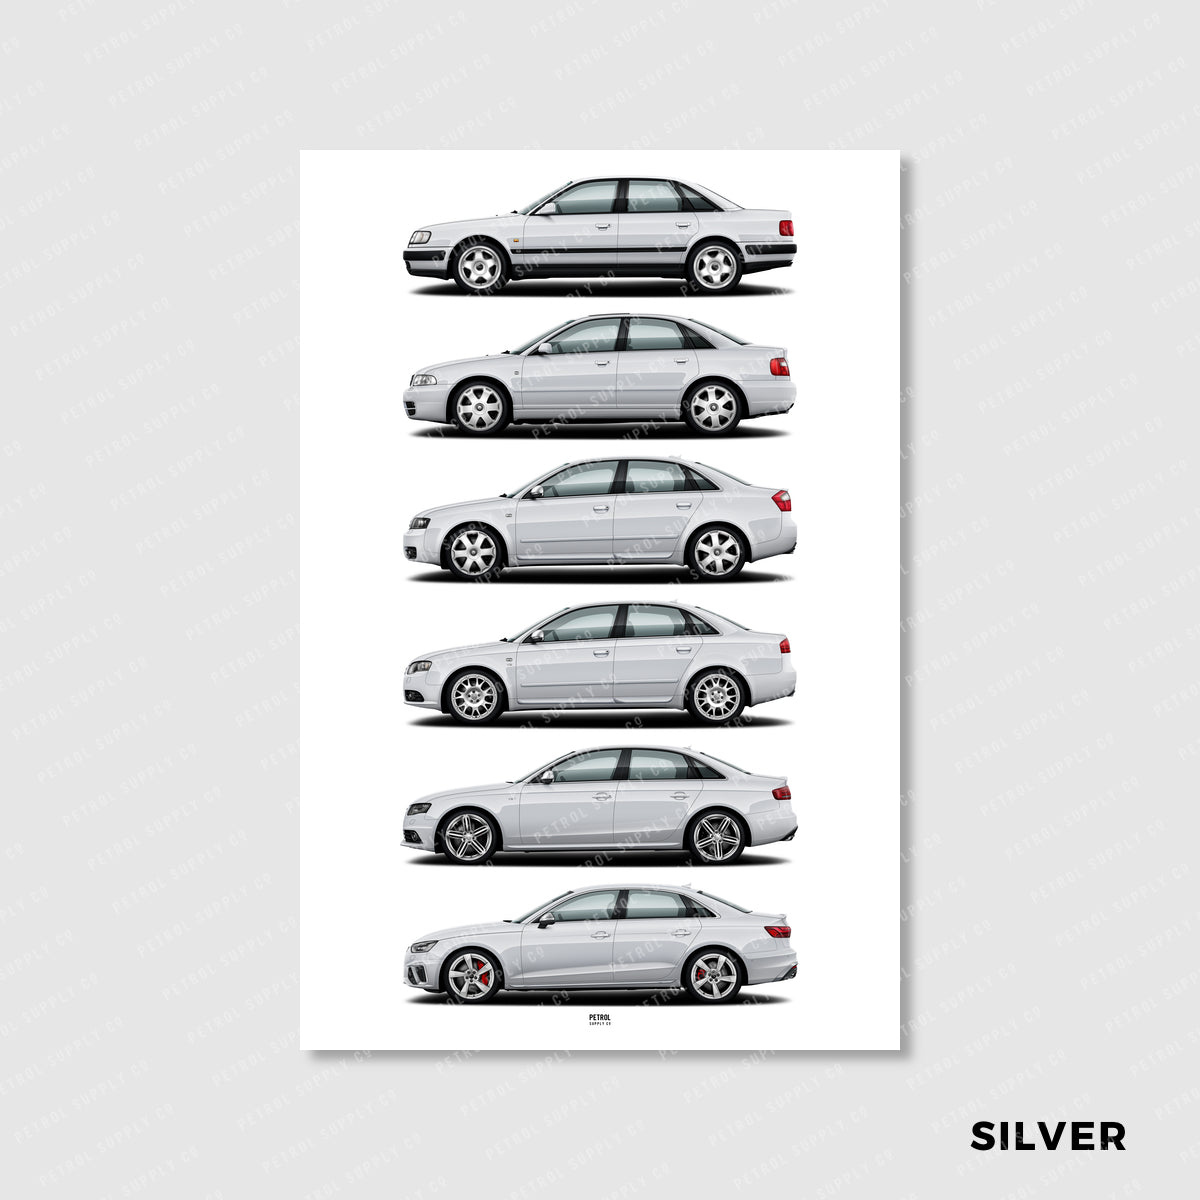 Audi S4 Poster Evolution Generations - silver